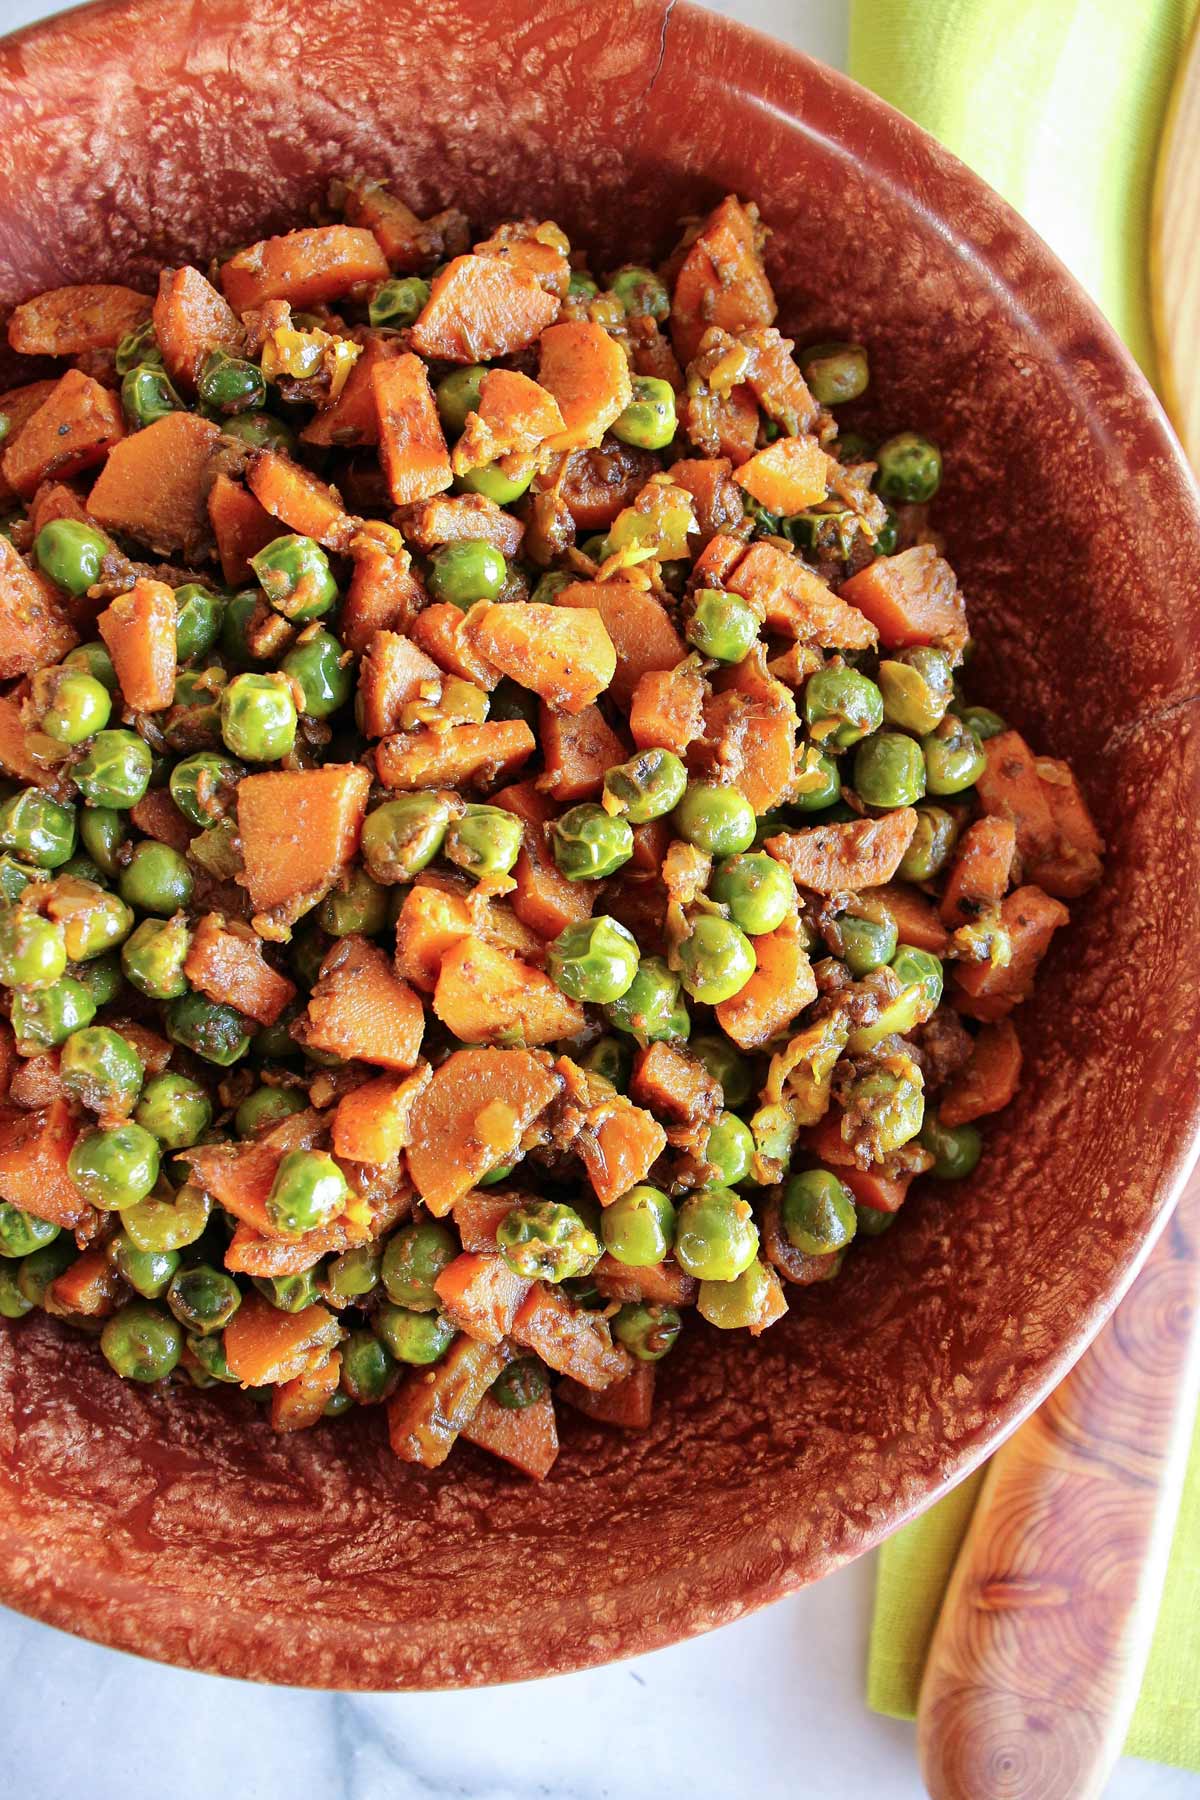 A rustic brown bowl filled with Indian gajar matar carrots and peas.